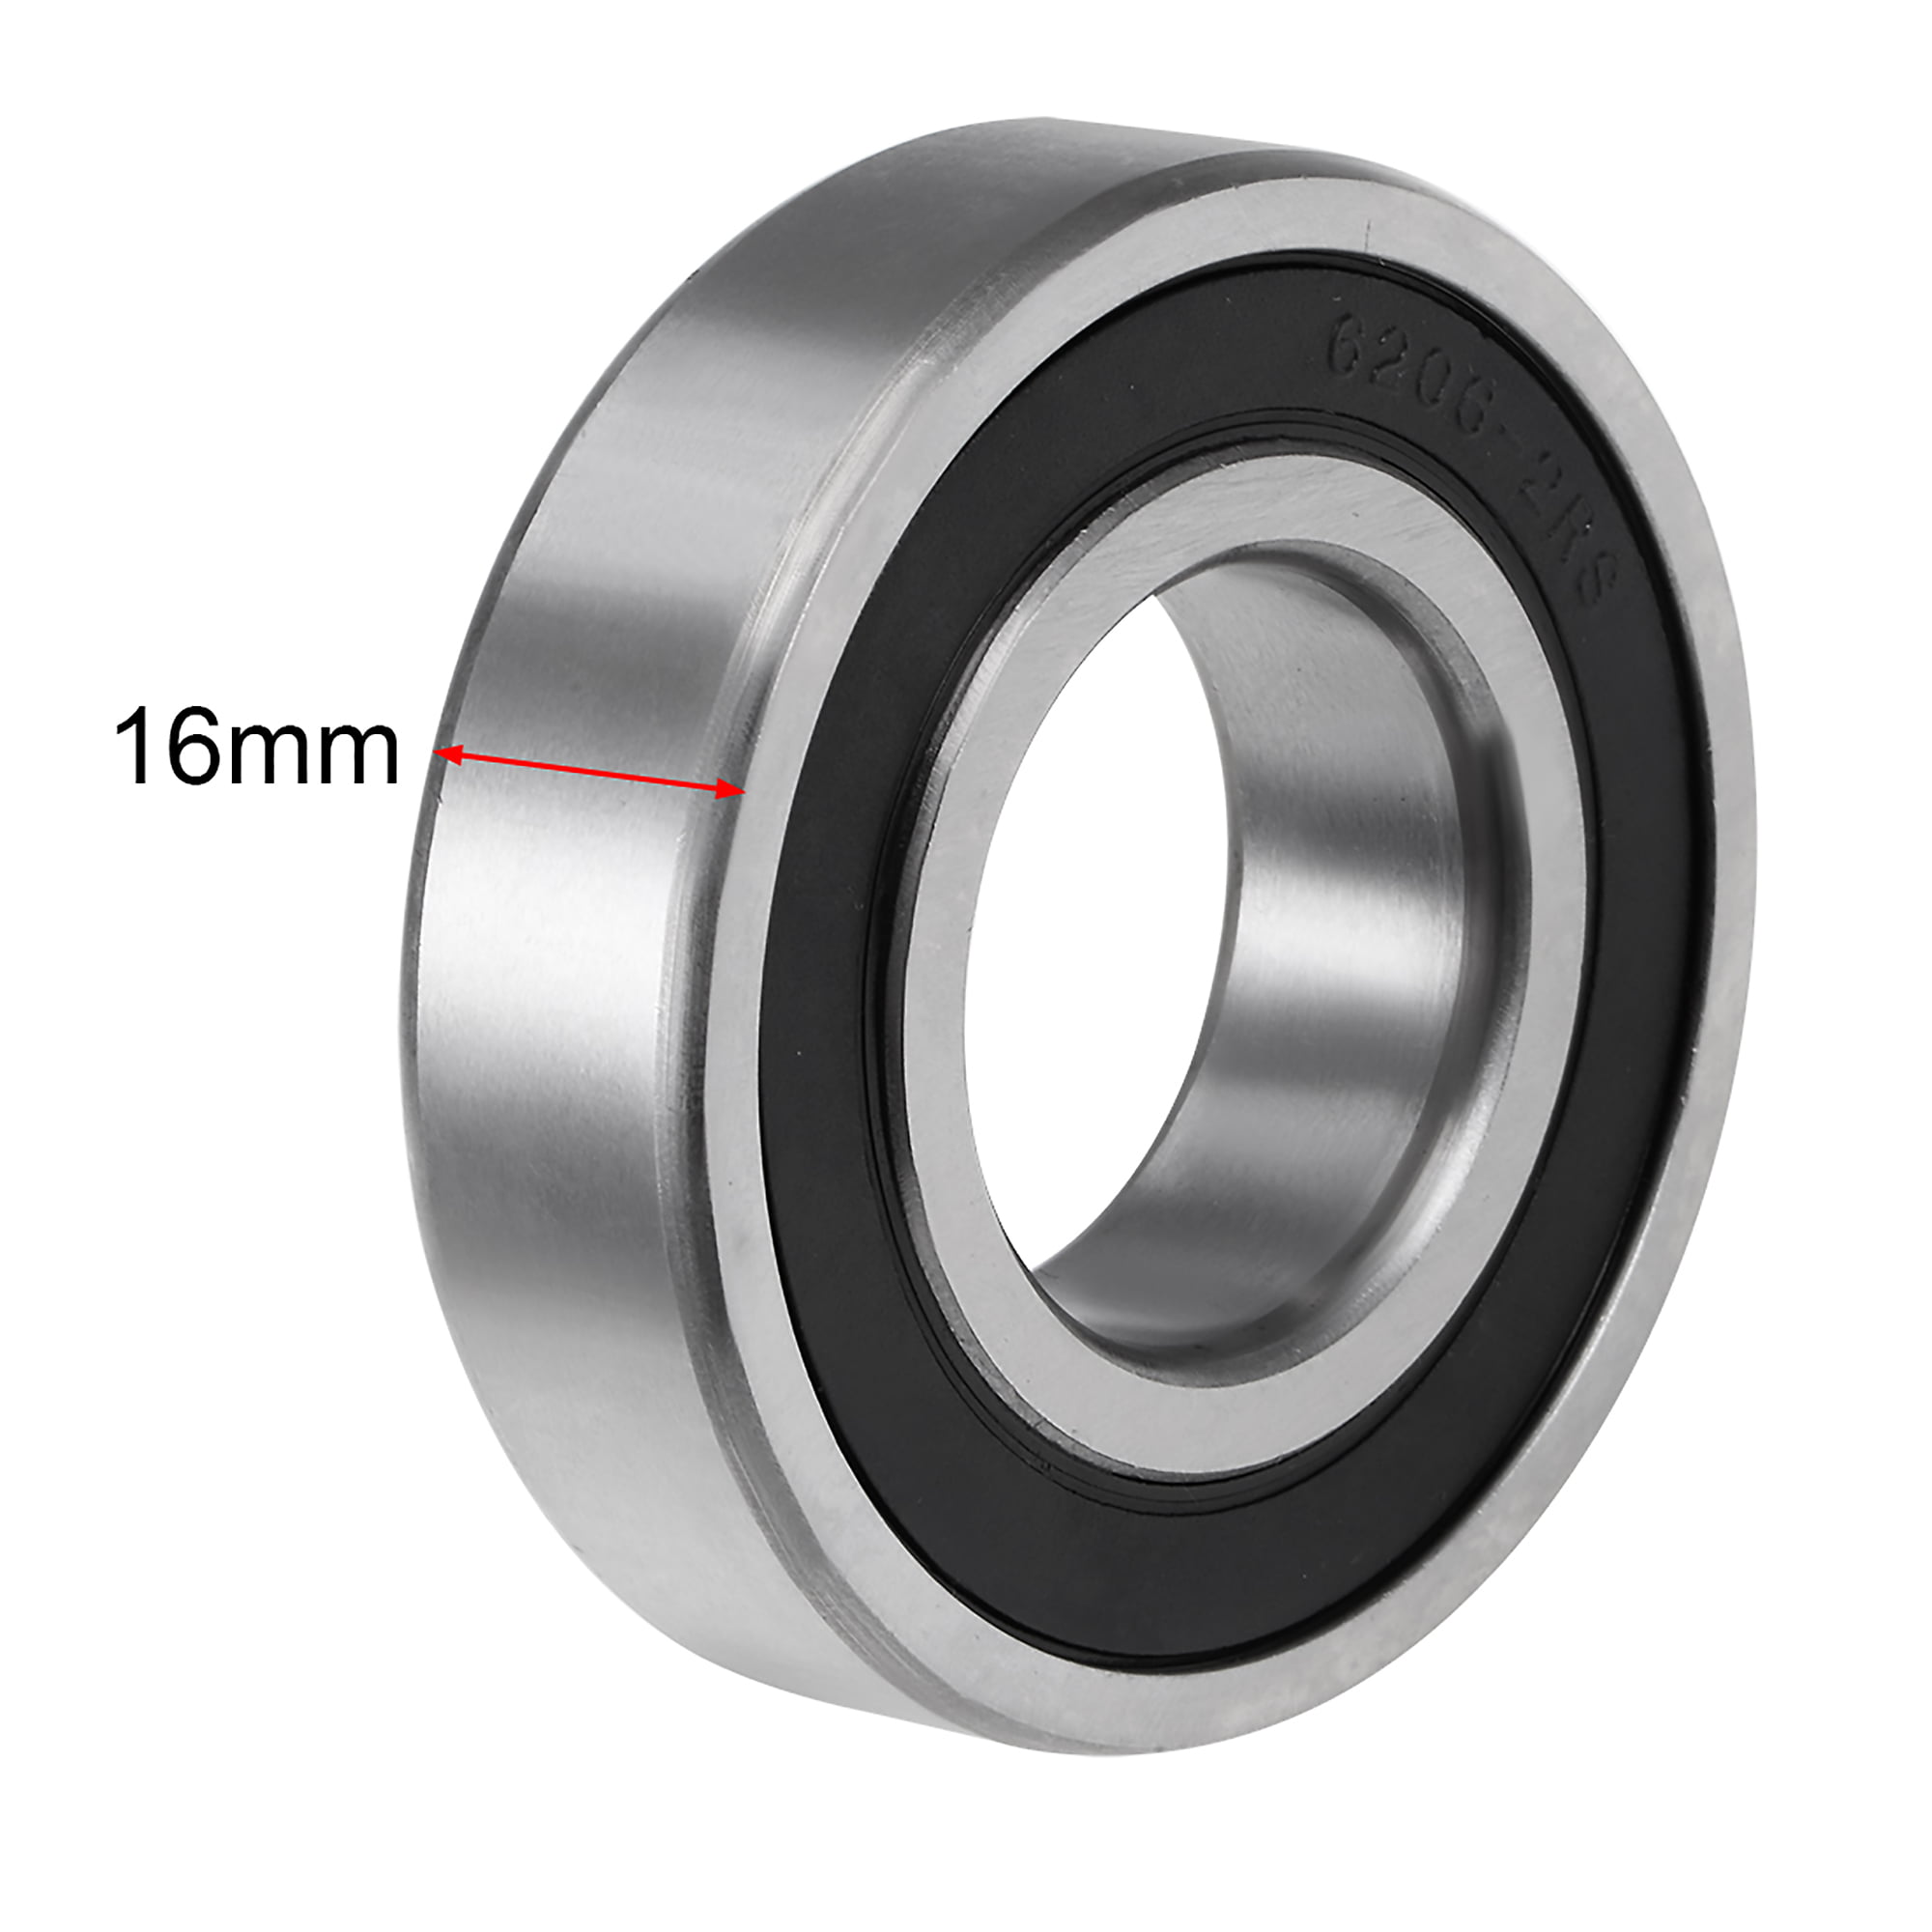 C3 Fit Premium Radial Ball Bearing 30x62x16mm Rubber Sealed Deep Groove 10-Pieces 6206 2RS 